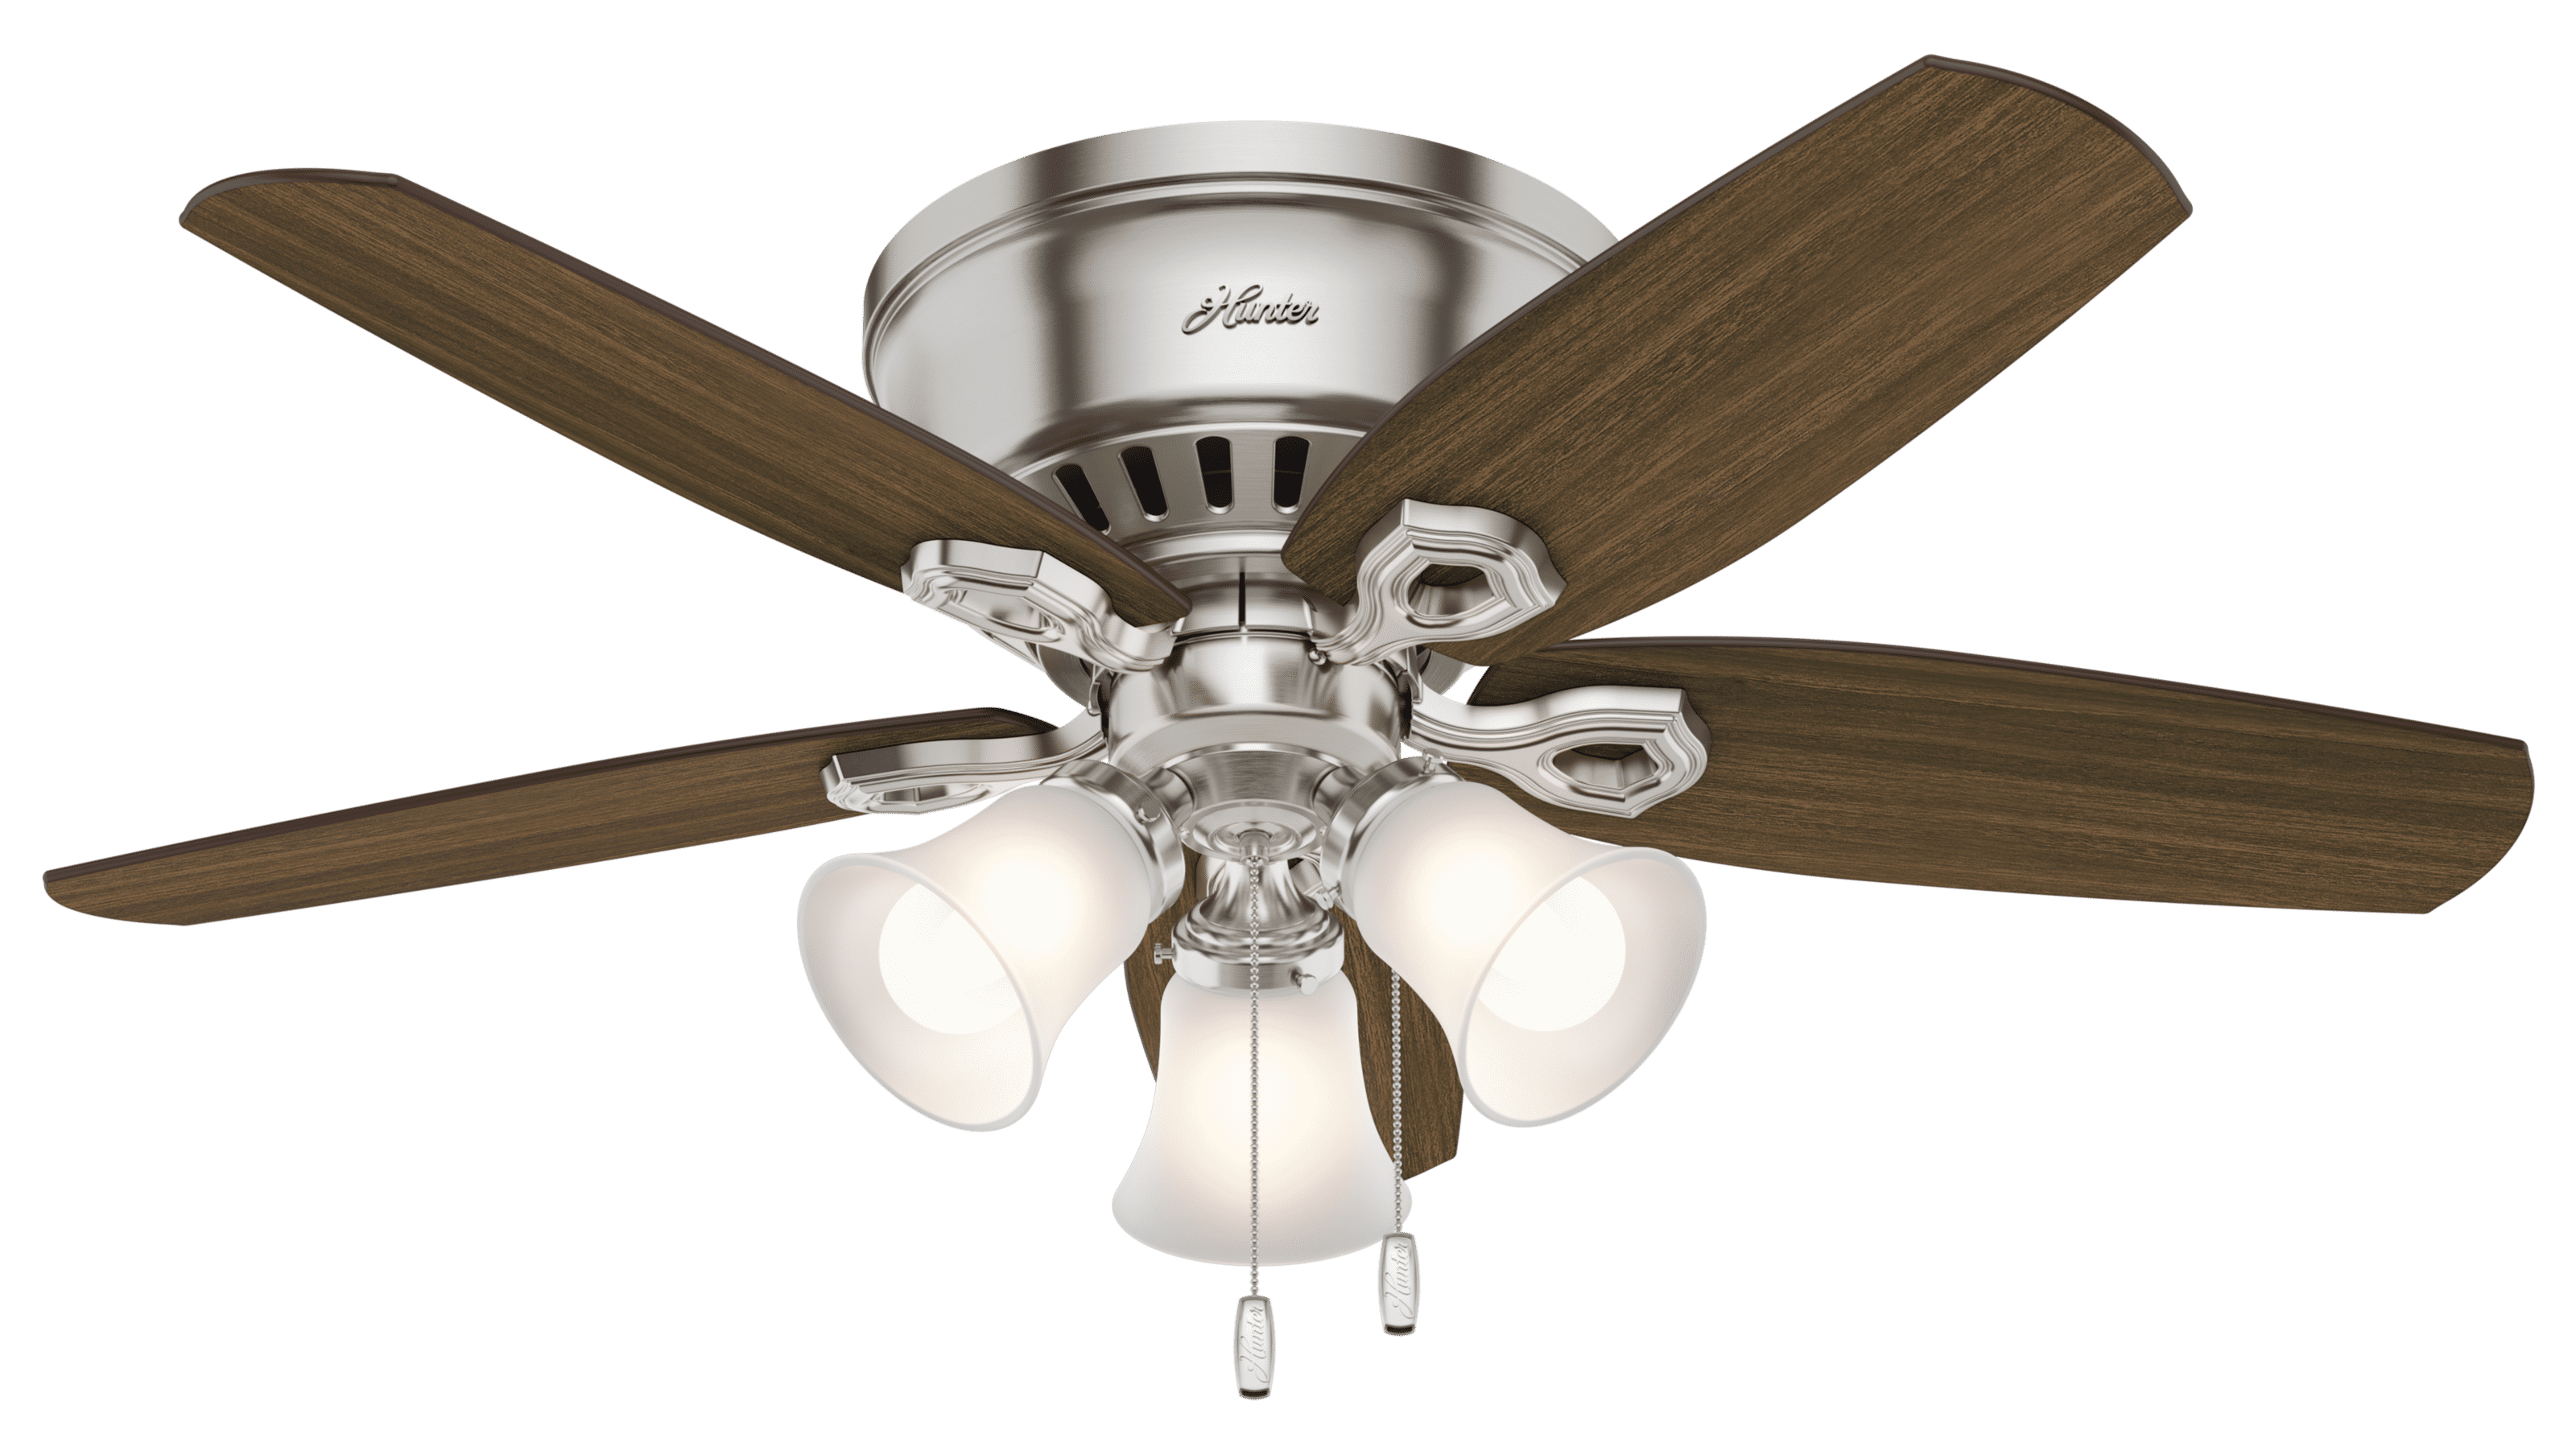 HUNTER CEILING FAN NEW PARTS 1 FAN PULL & 1 LIGHT PULL 9" CHAIN BRUSHED NICKEL 